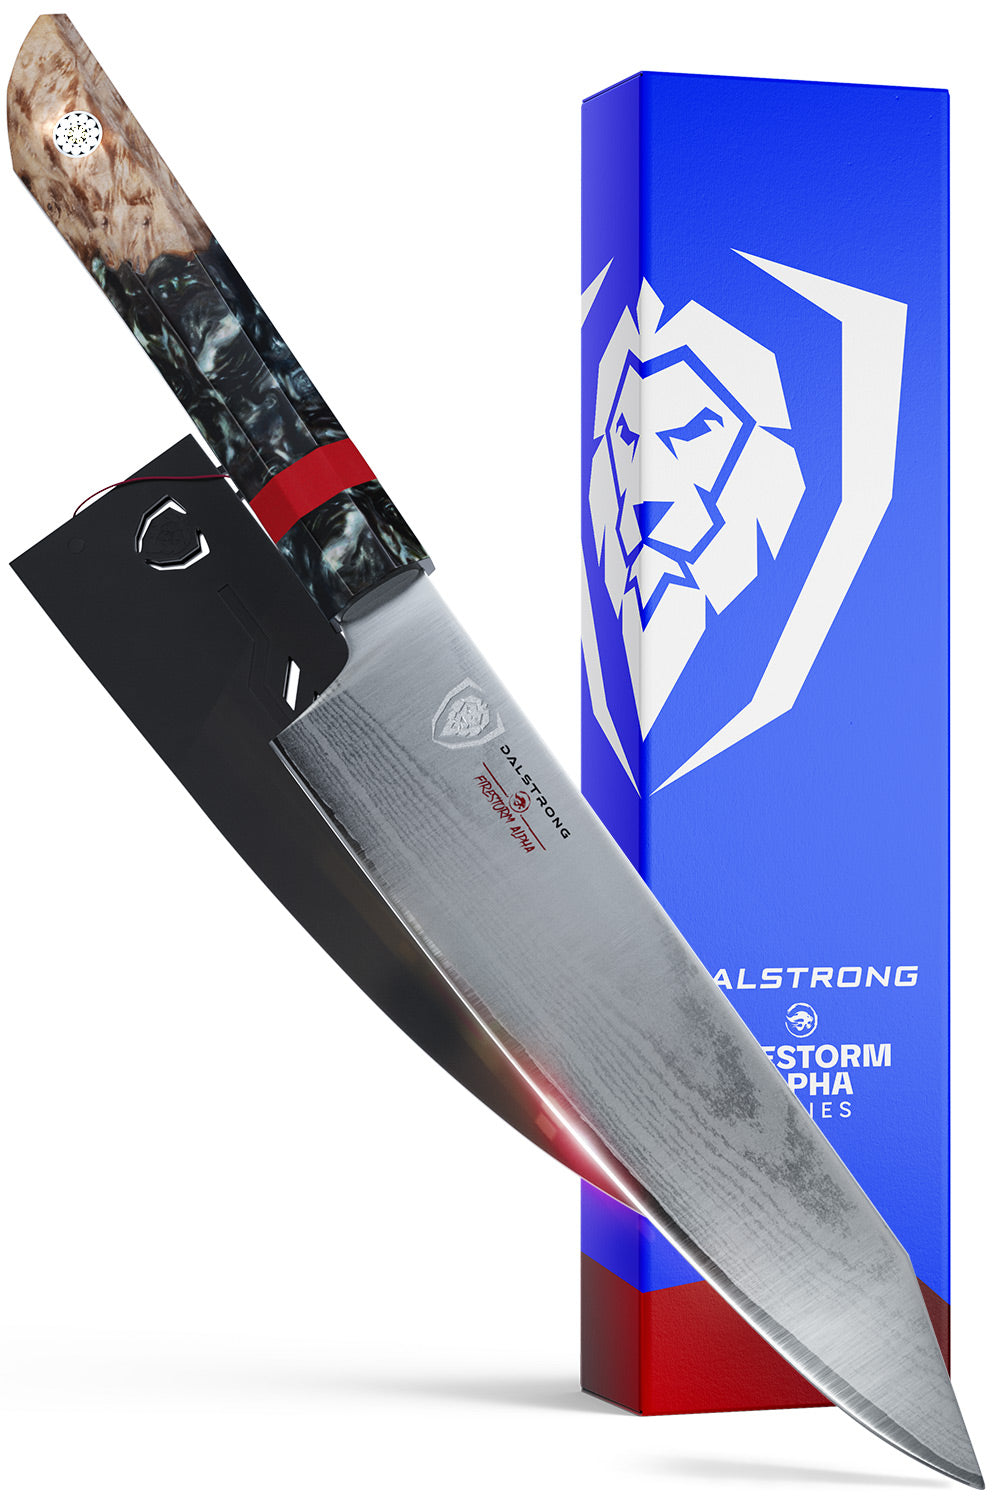 Dalstrong firestorm alpha series 8 inch chef knife in front of it's premium packaging.